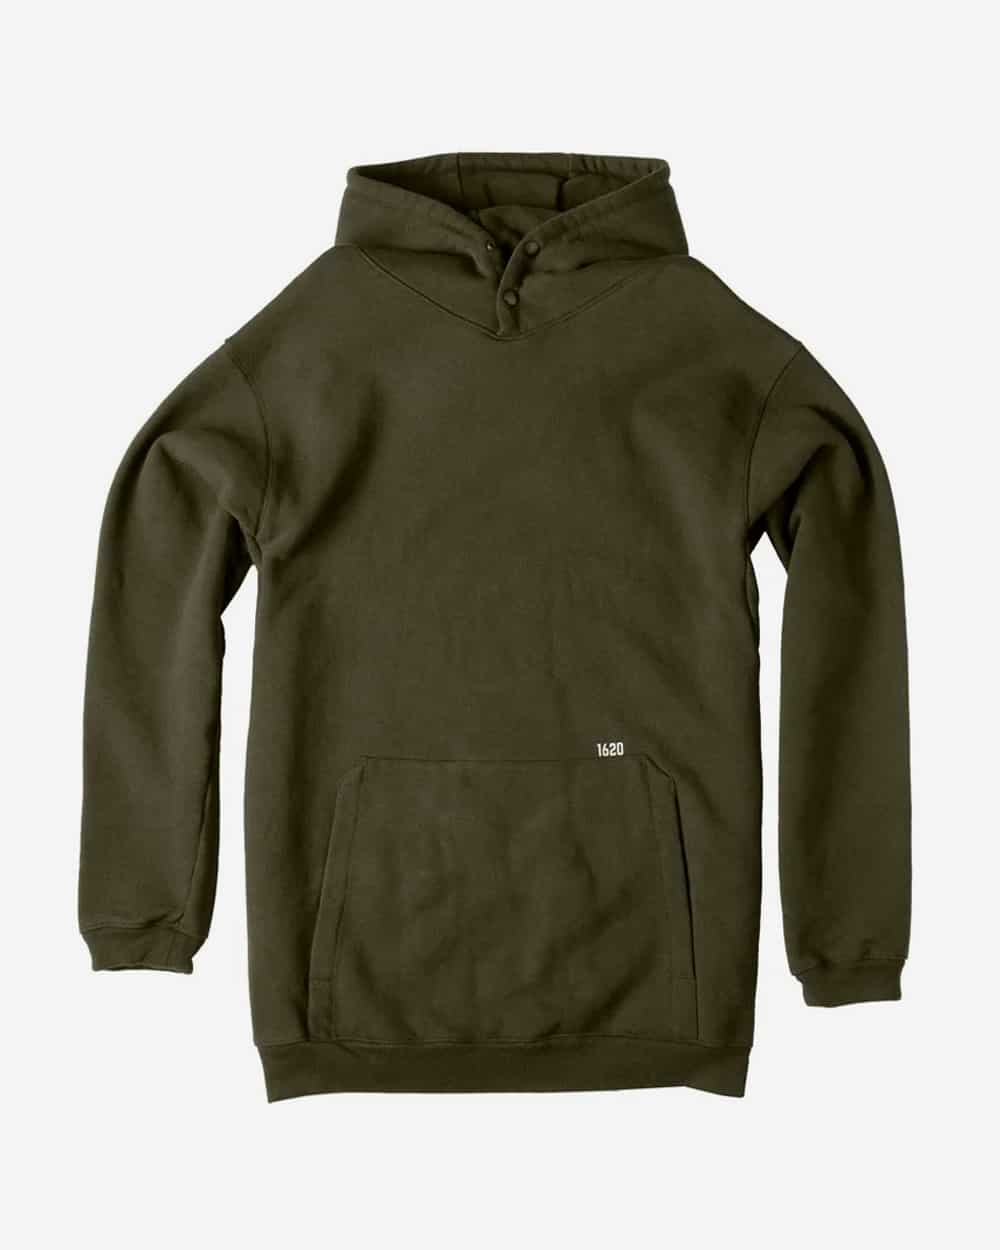 Made in the USA Hoodies: 15 Brands Committed To America